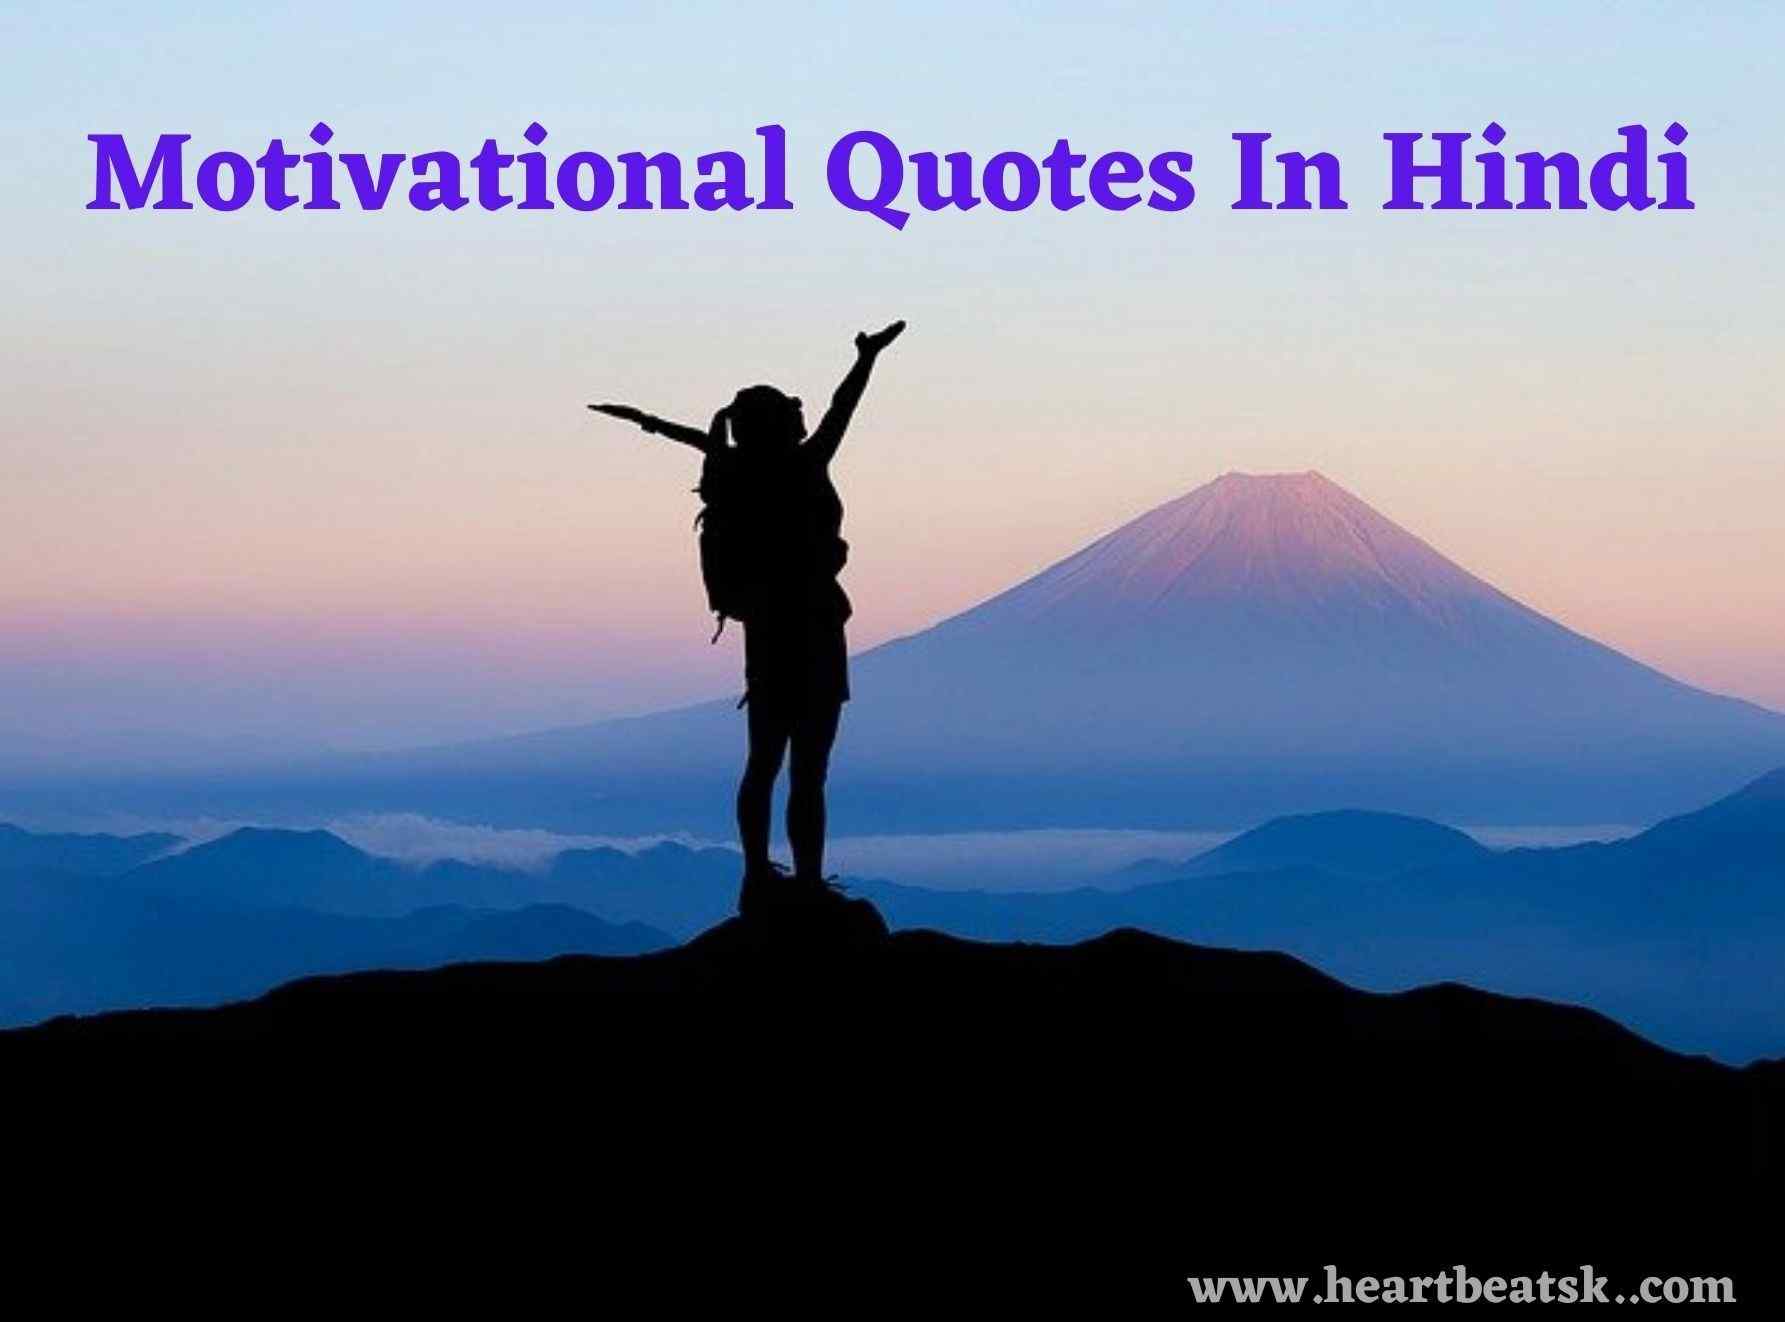 Motivational Quotes Thoughts In Hindi